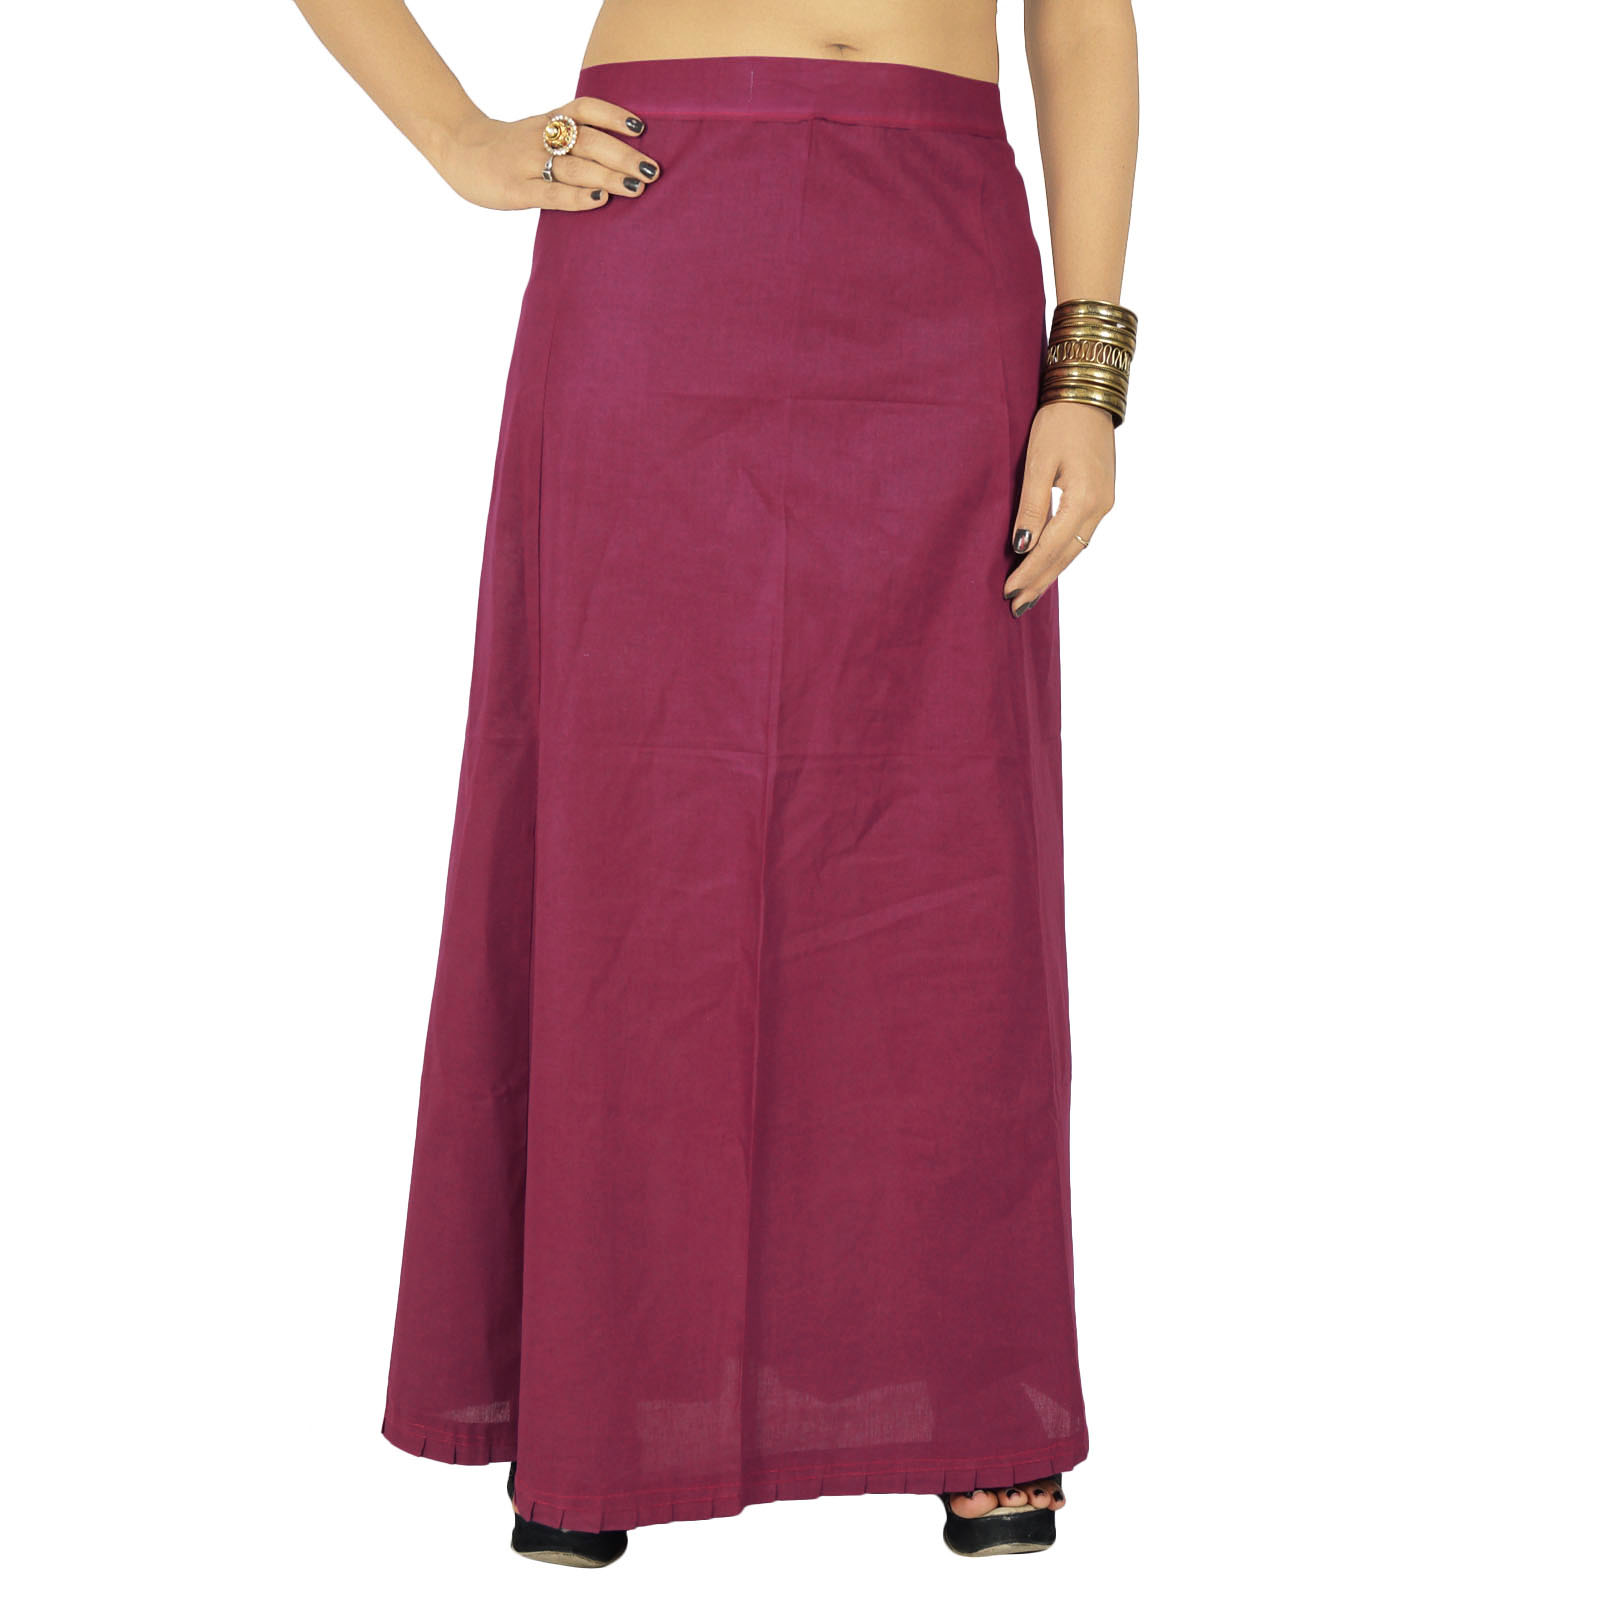 Solid Bollywood Cotton Inskirt Stitched Indian Petticoat Lining-pzq | eBay